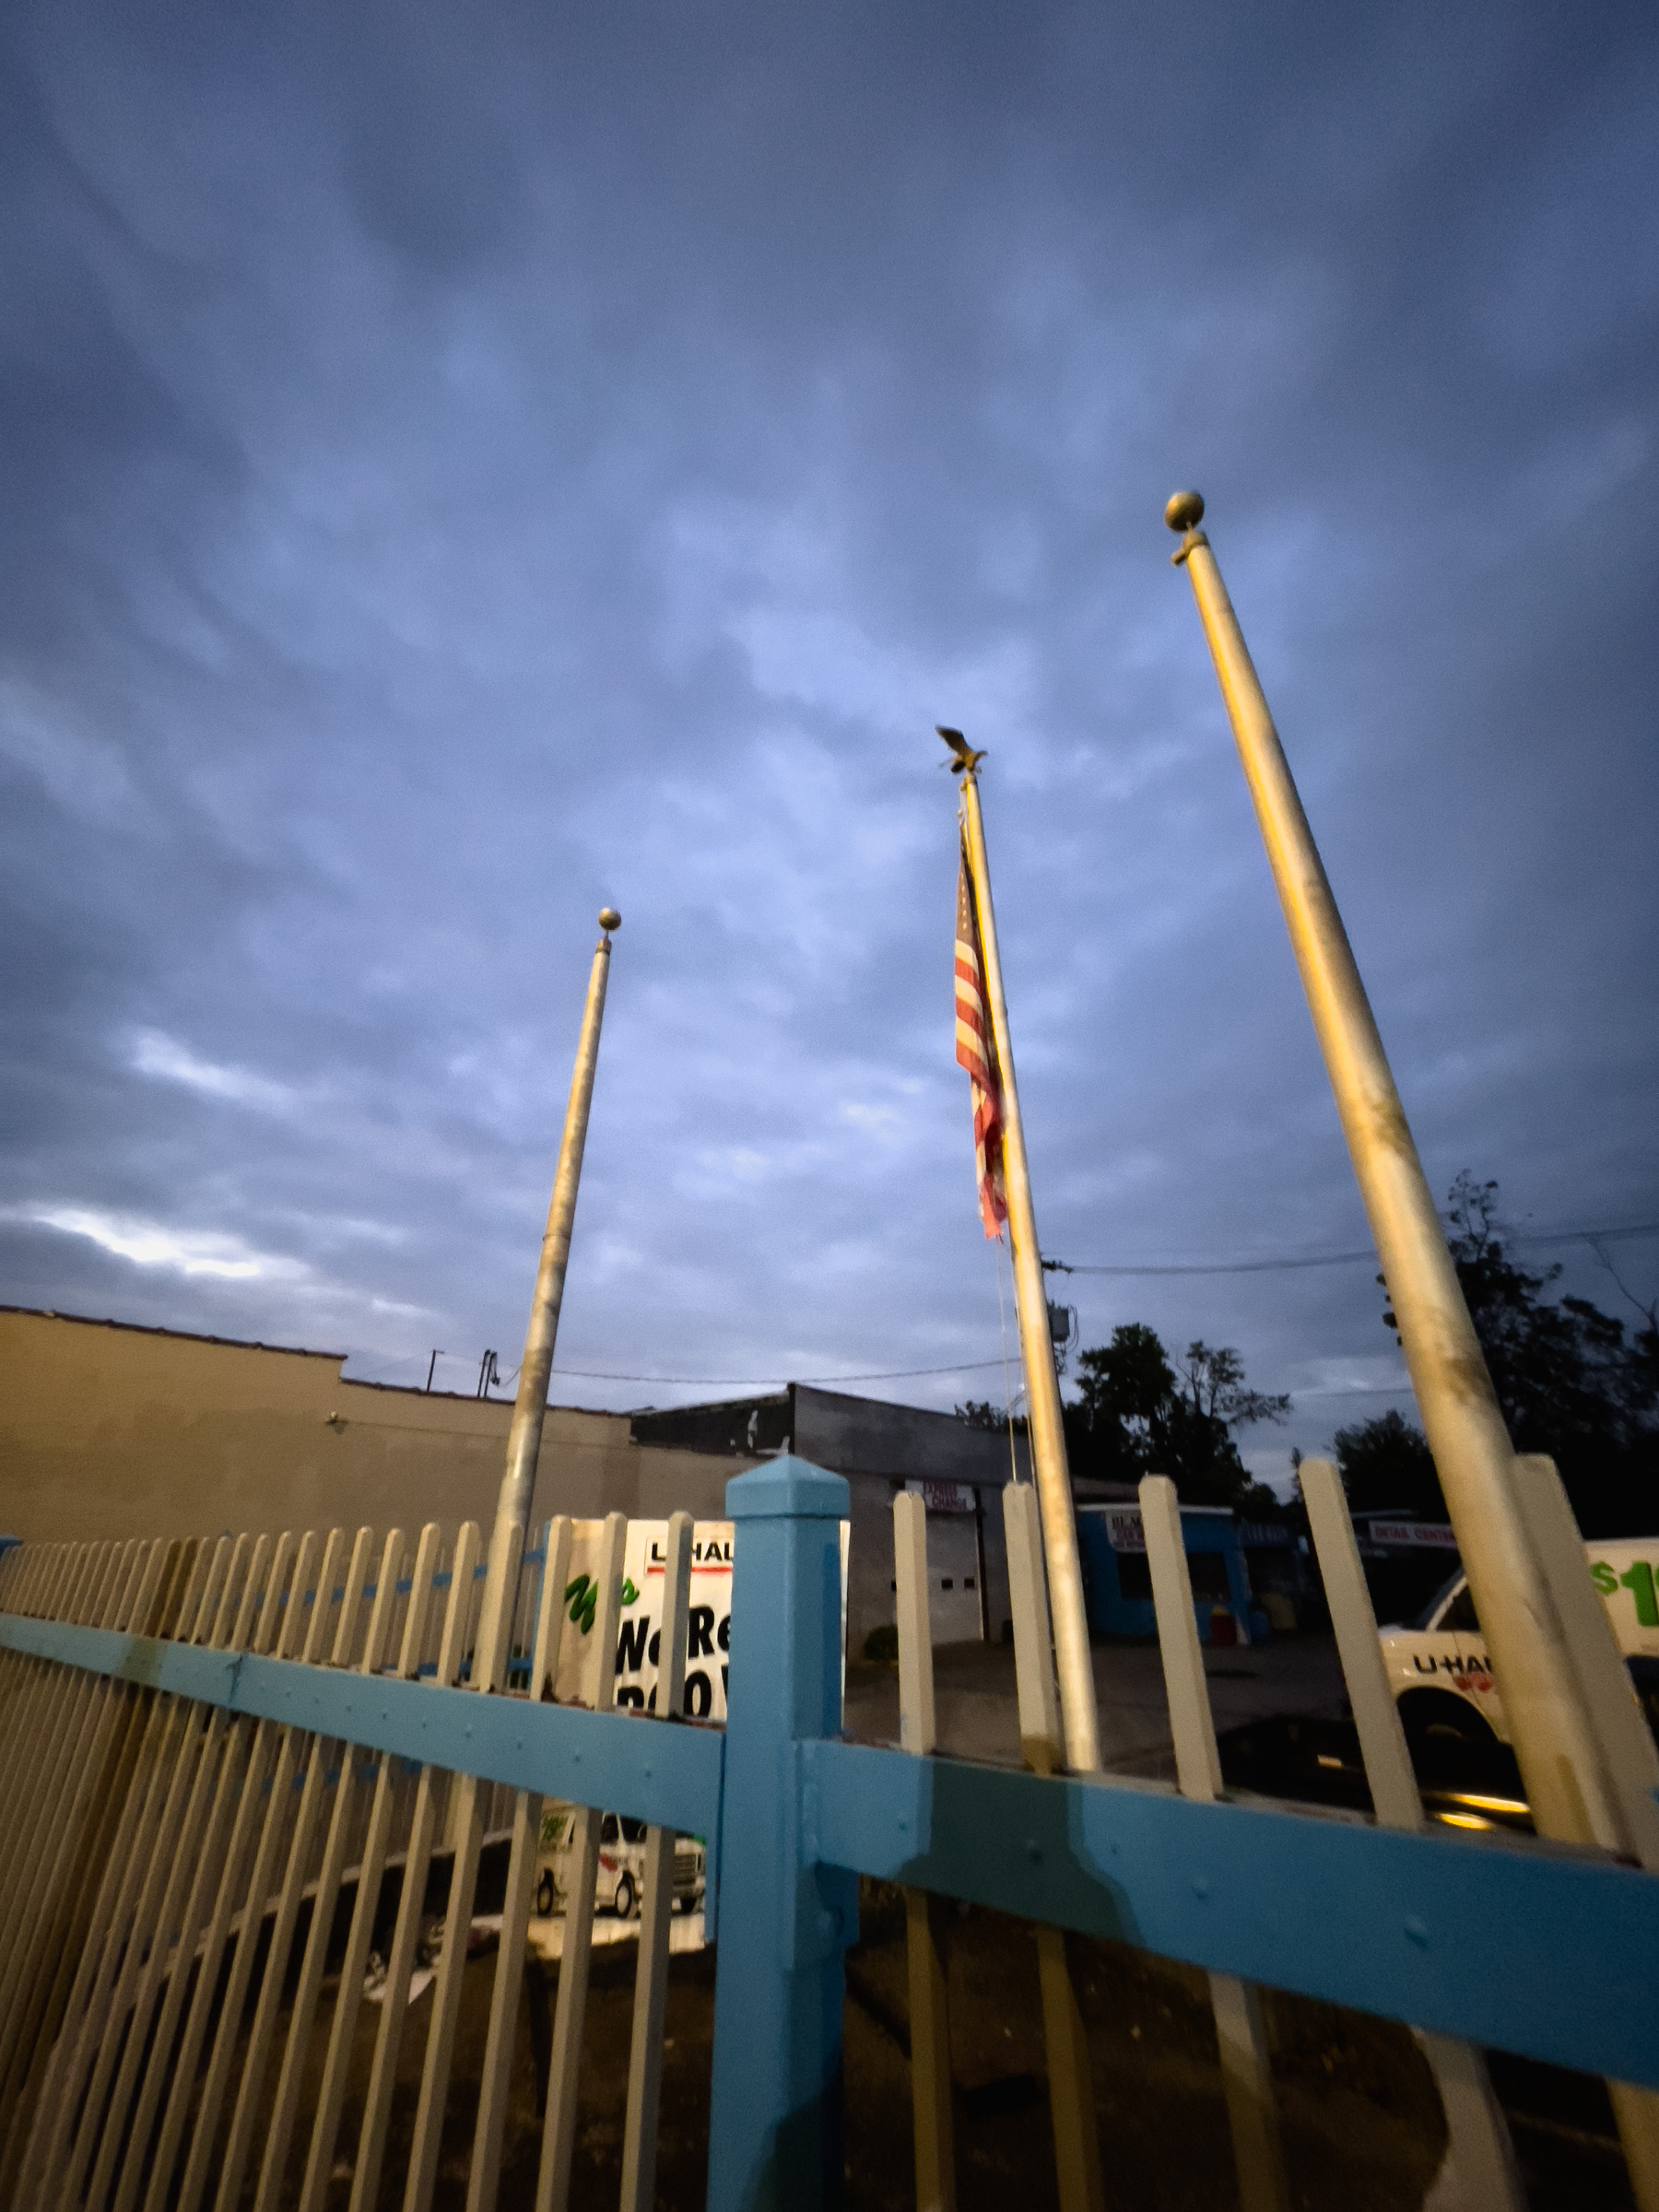 Wide angle shot of three flagpoles and sky, blue metal picket fence in foreground.